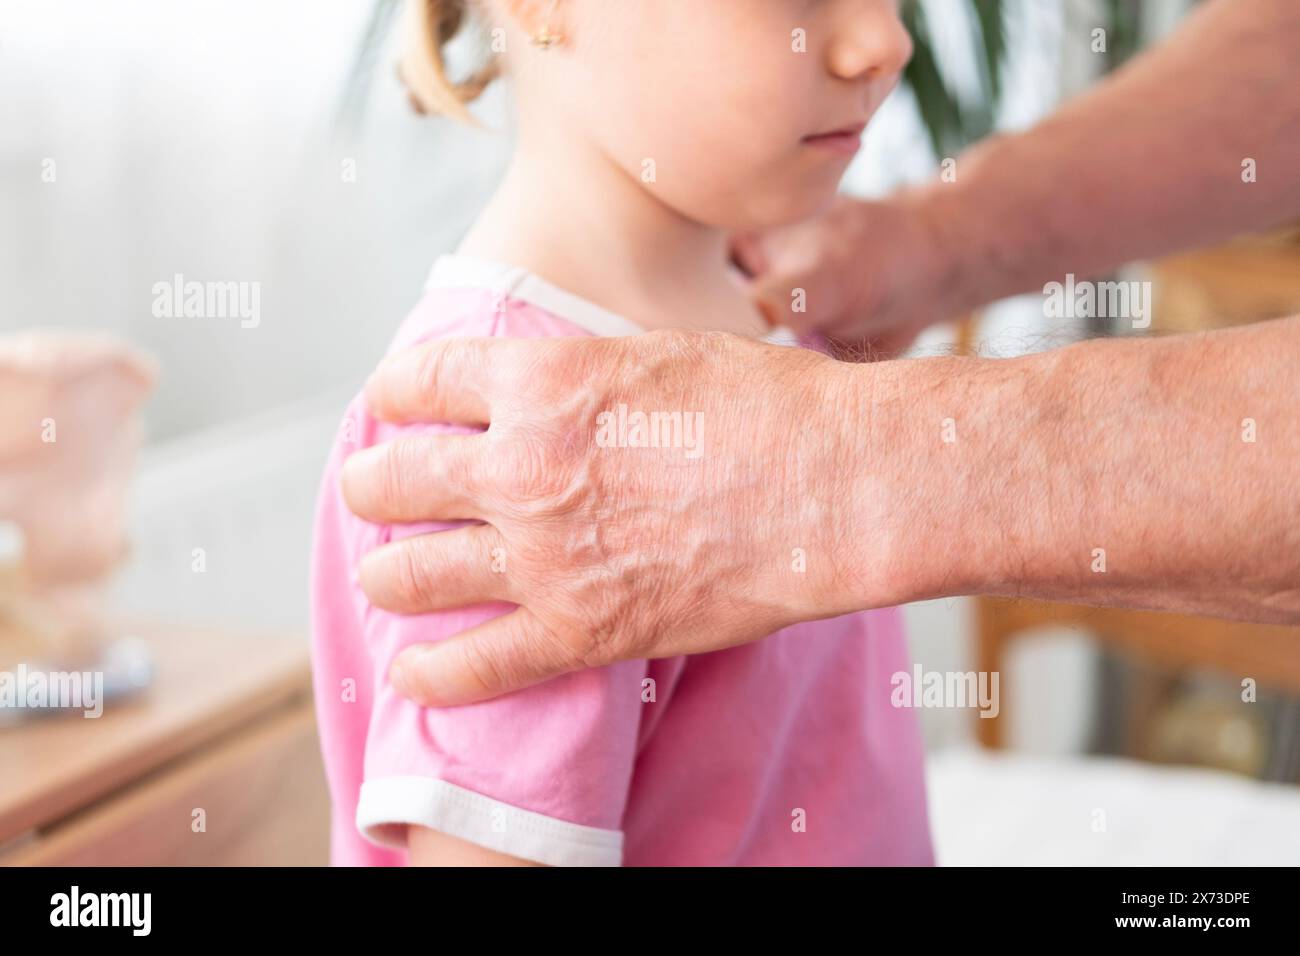 male Orthopedist doctor conducts spinal examination child, young girl shows signs scoliosis, spine deformity, healthcare provider, spine inspection, h Stock Photo